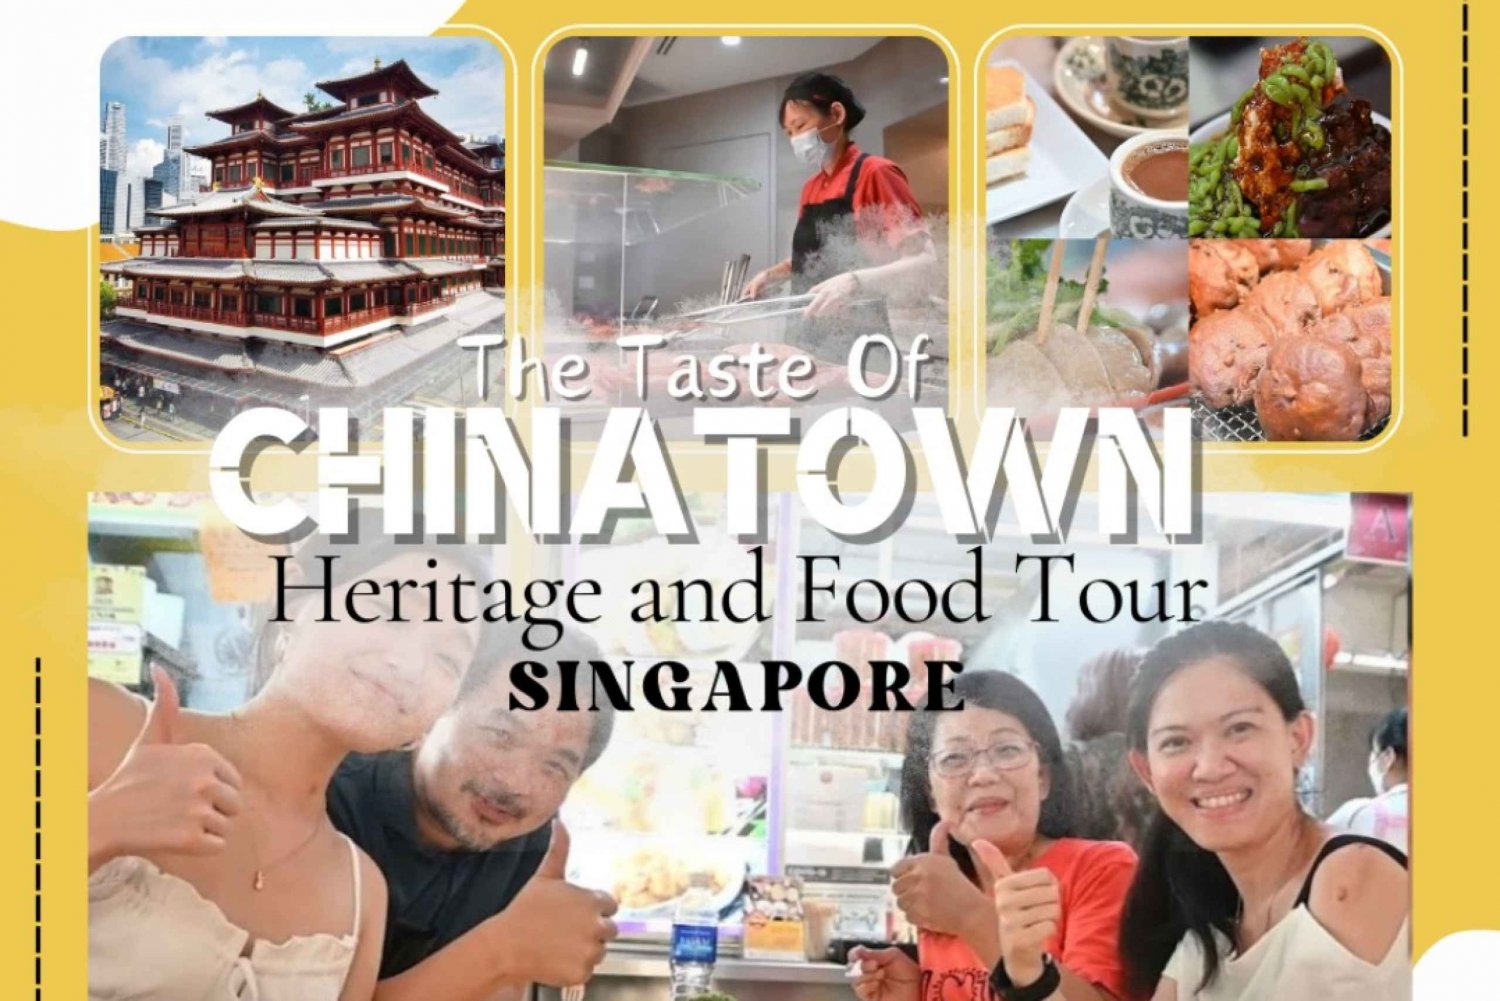 Singapore: Explore Chinatown Culture with 8 local tastings